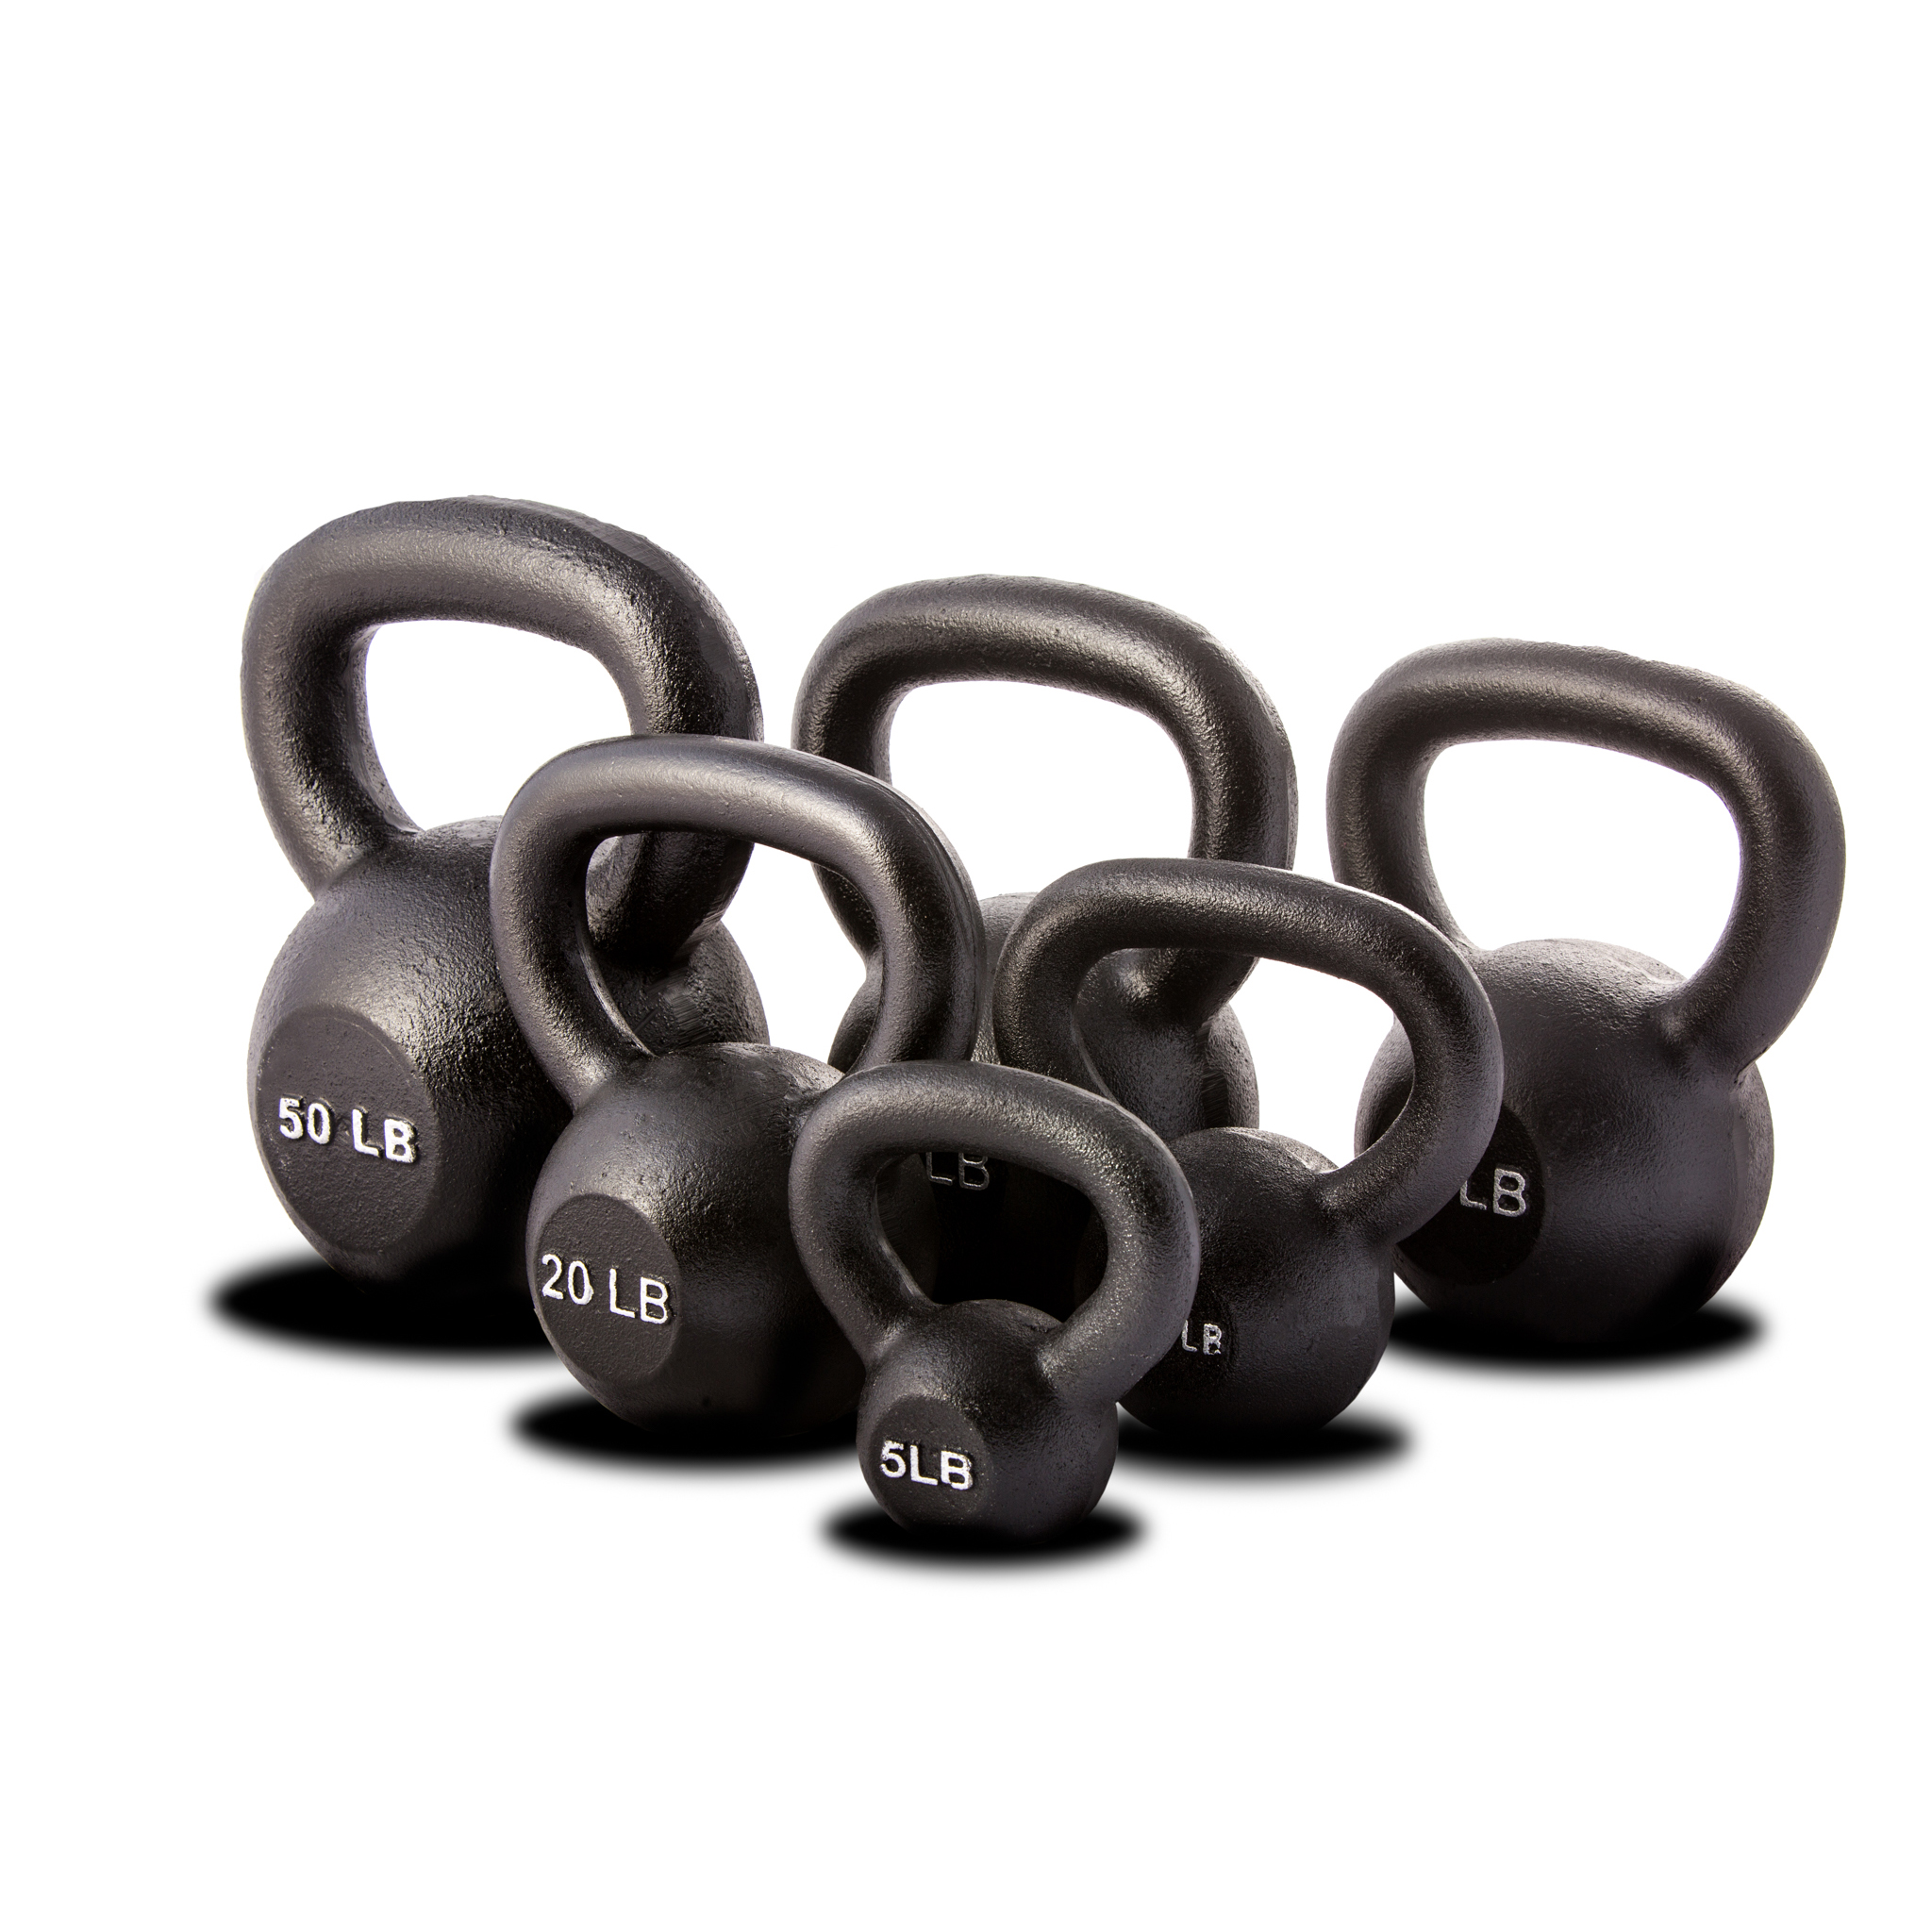 Home CrossFit Exercises 20 lbs Fitness Workout Cast Iron Kettlebell 